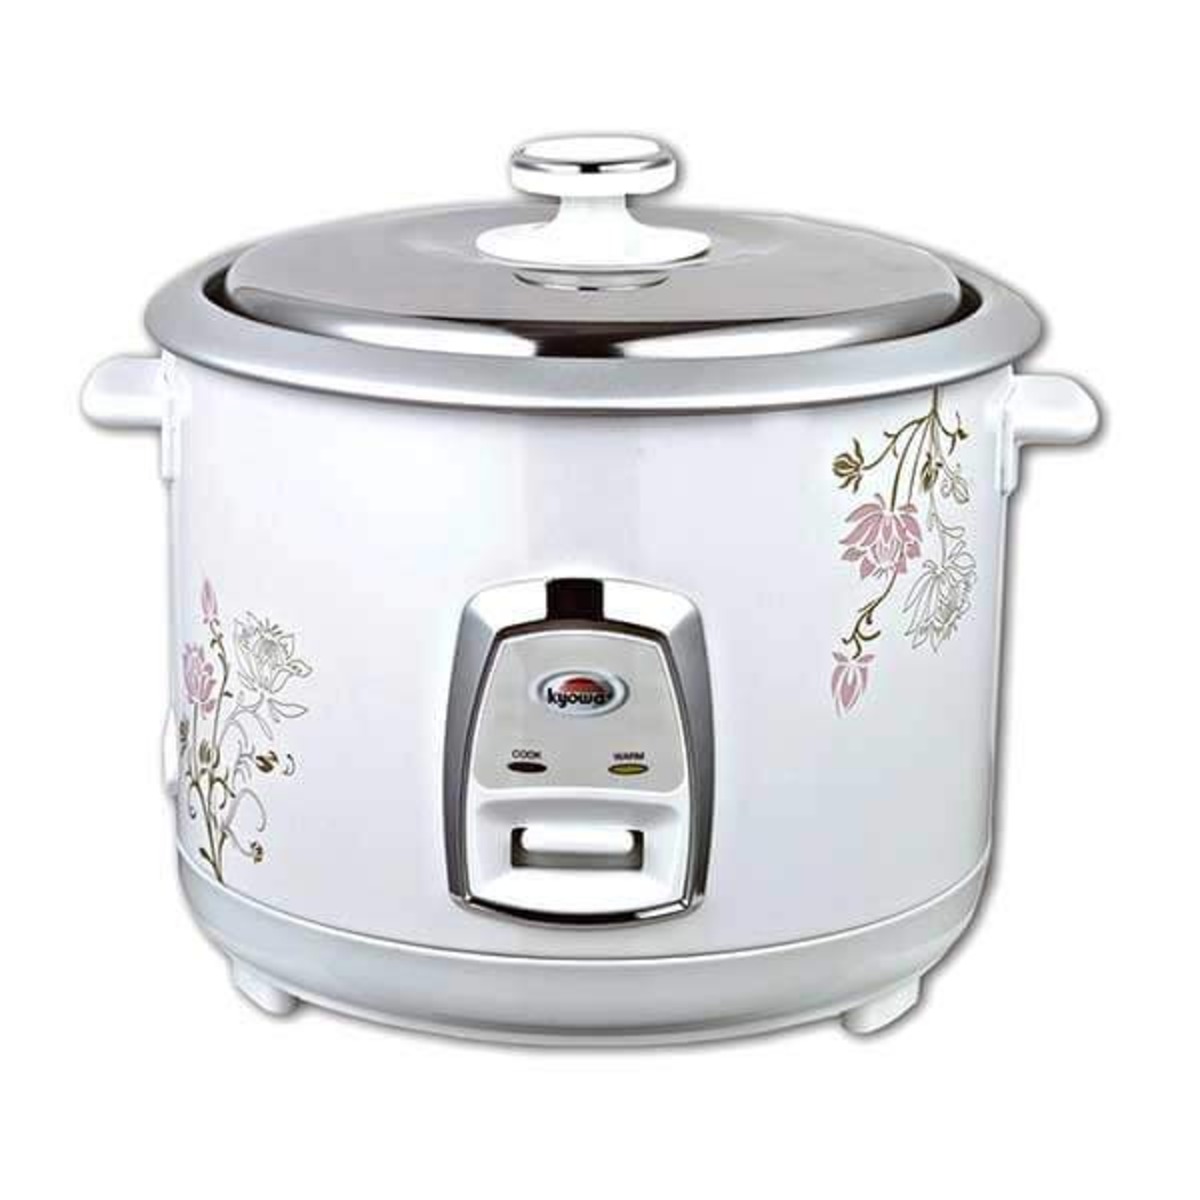 Where To Buy A Rice Cooker